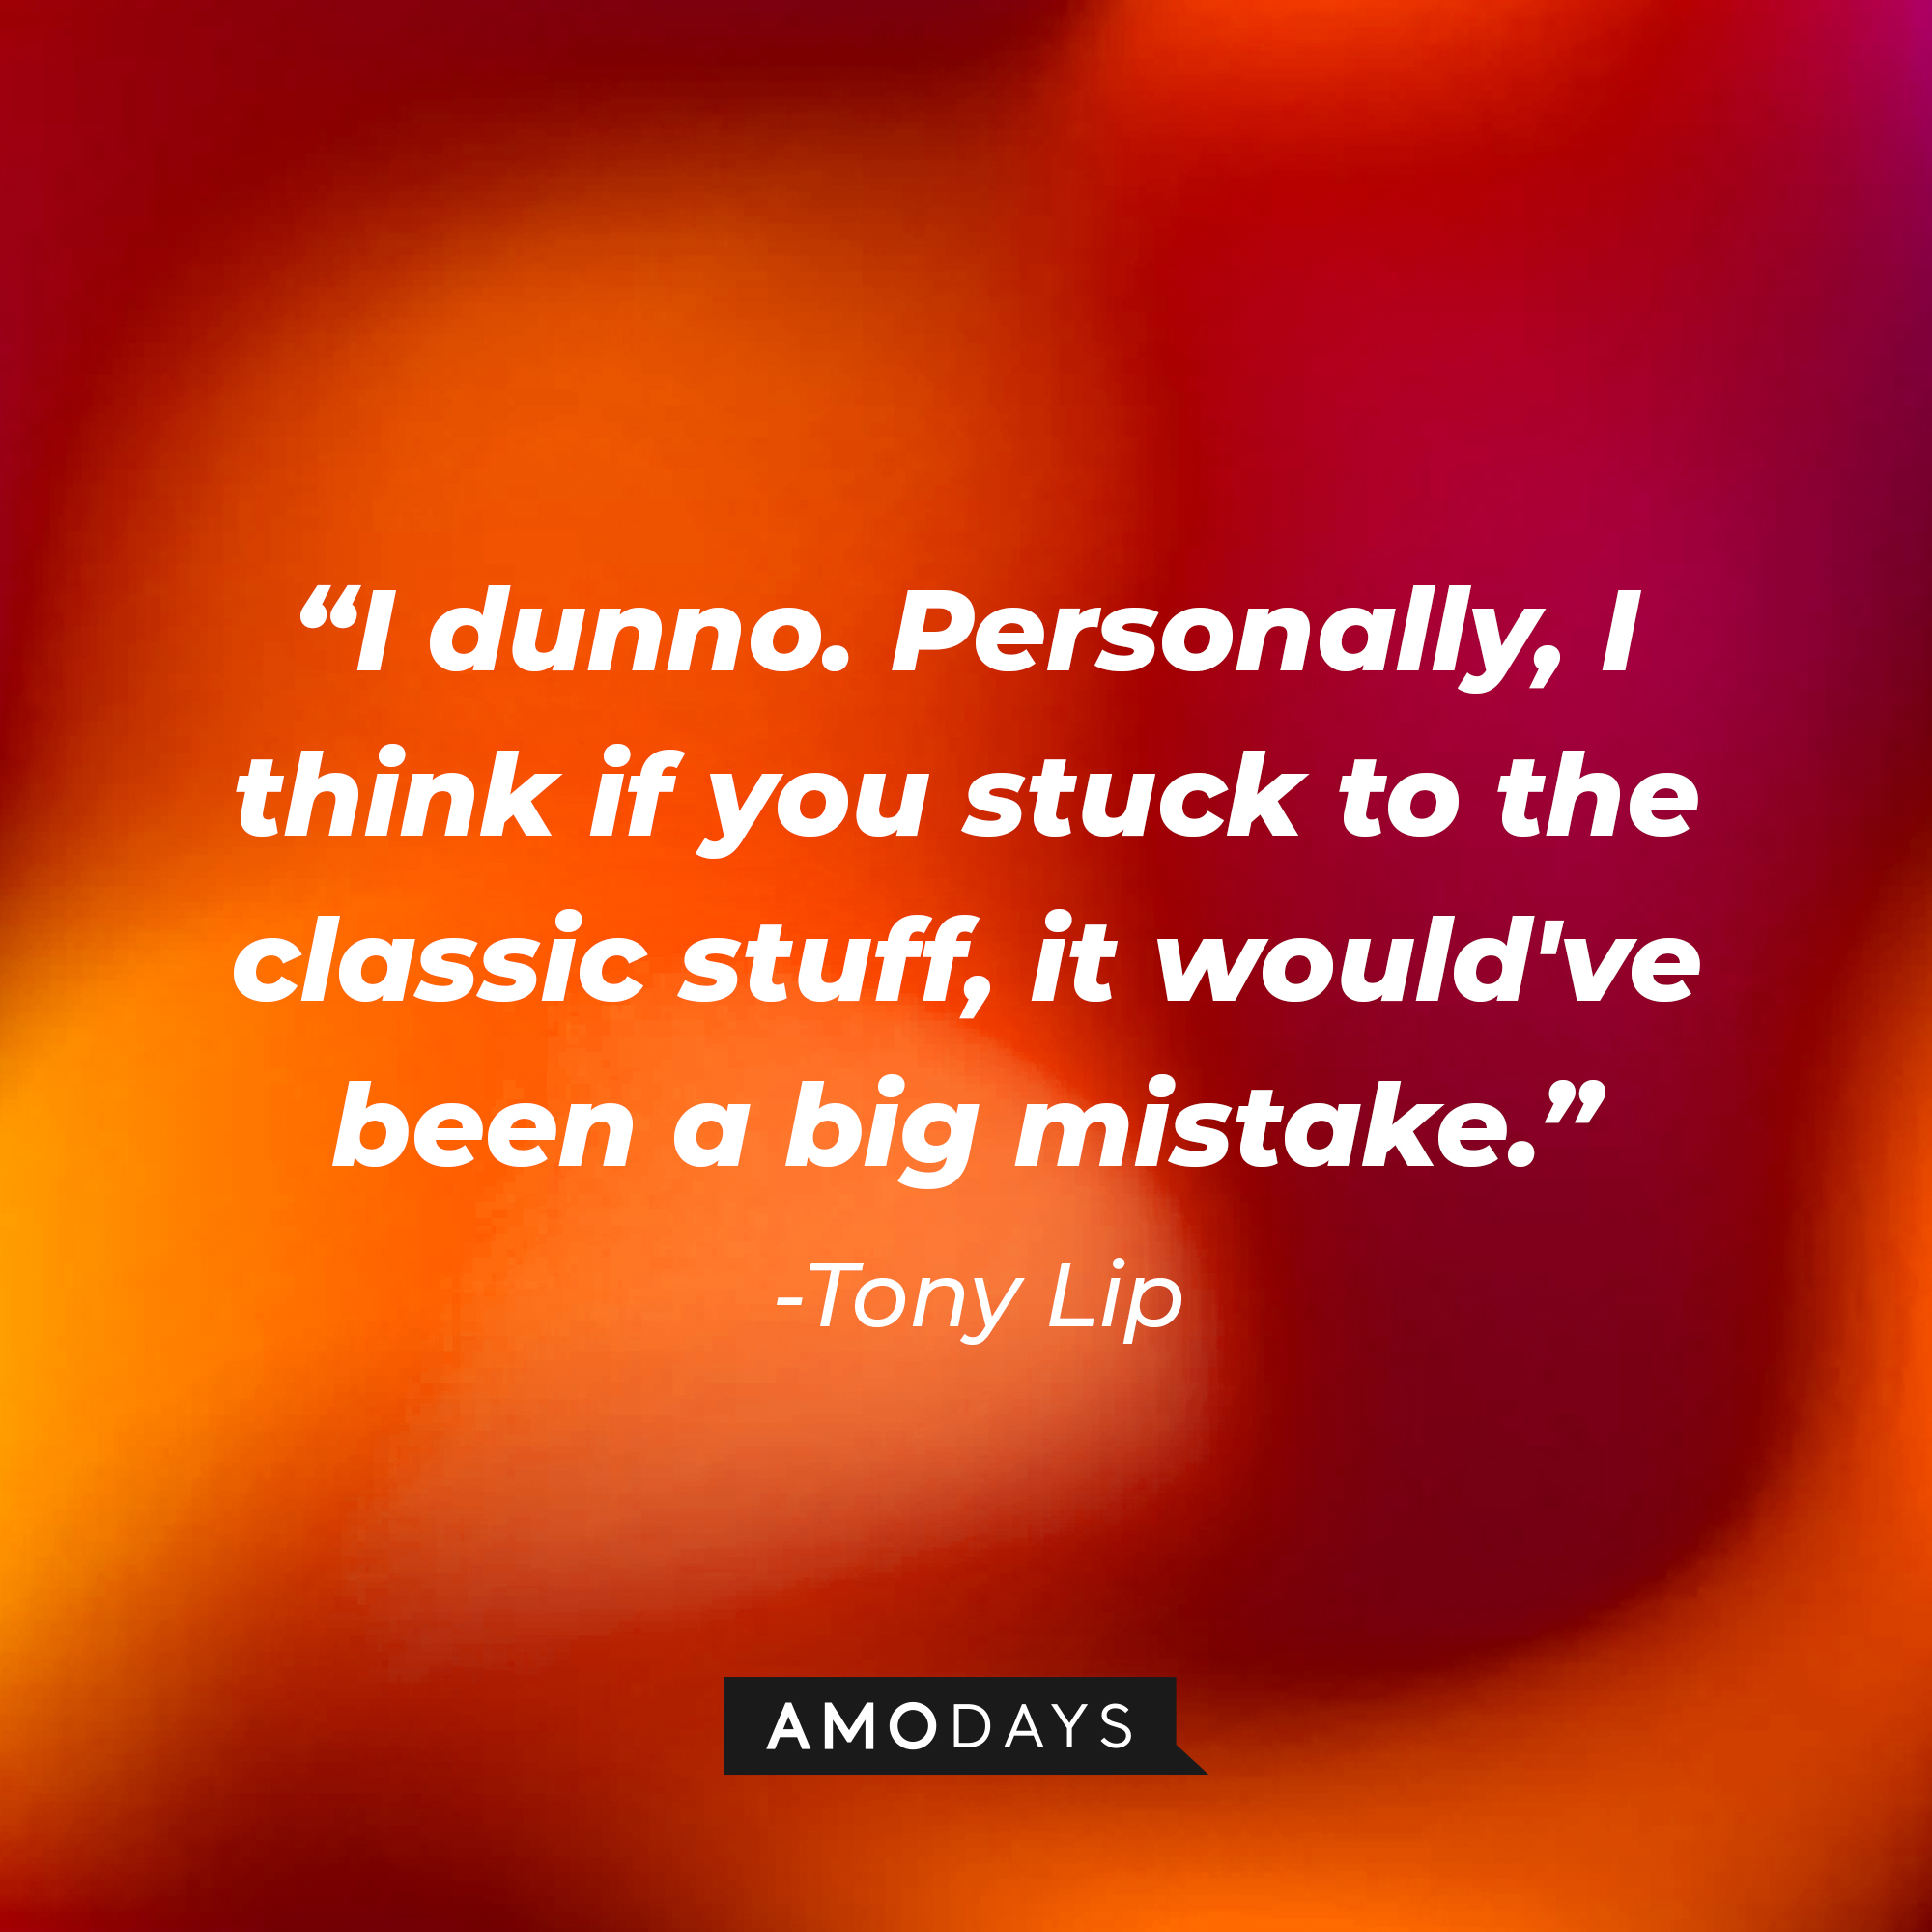 Tony Lip's quote: “I dunno. Personally, I think if you stuck to the classic stuff, it would've been a big mistake.” | Source: Amodays